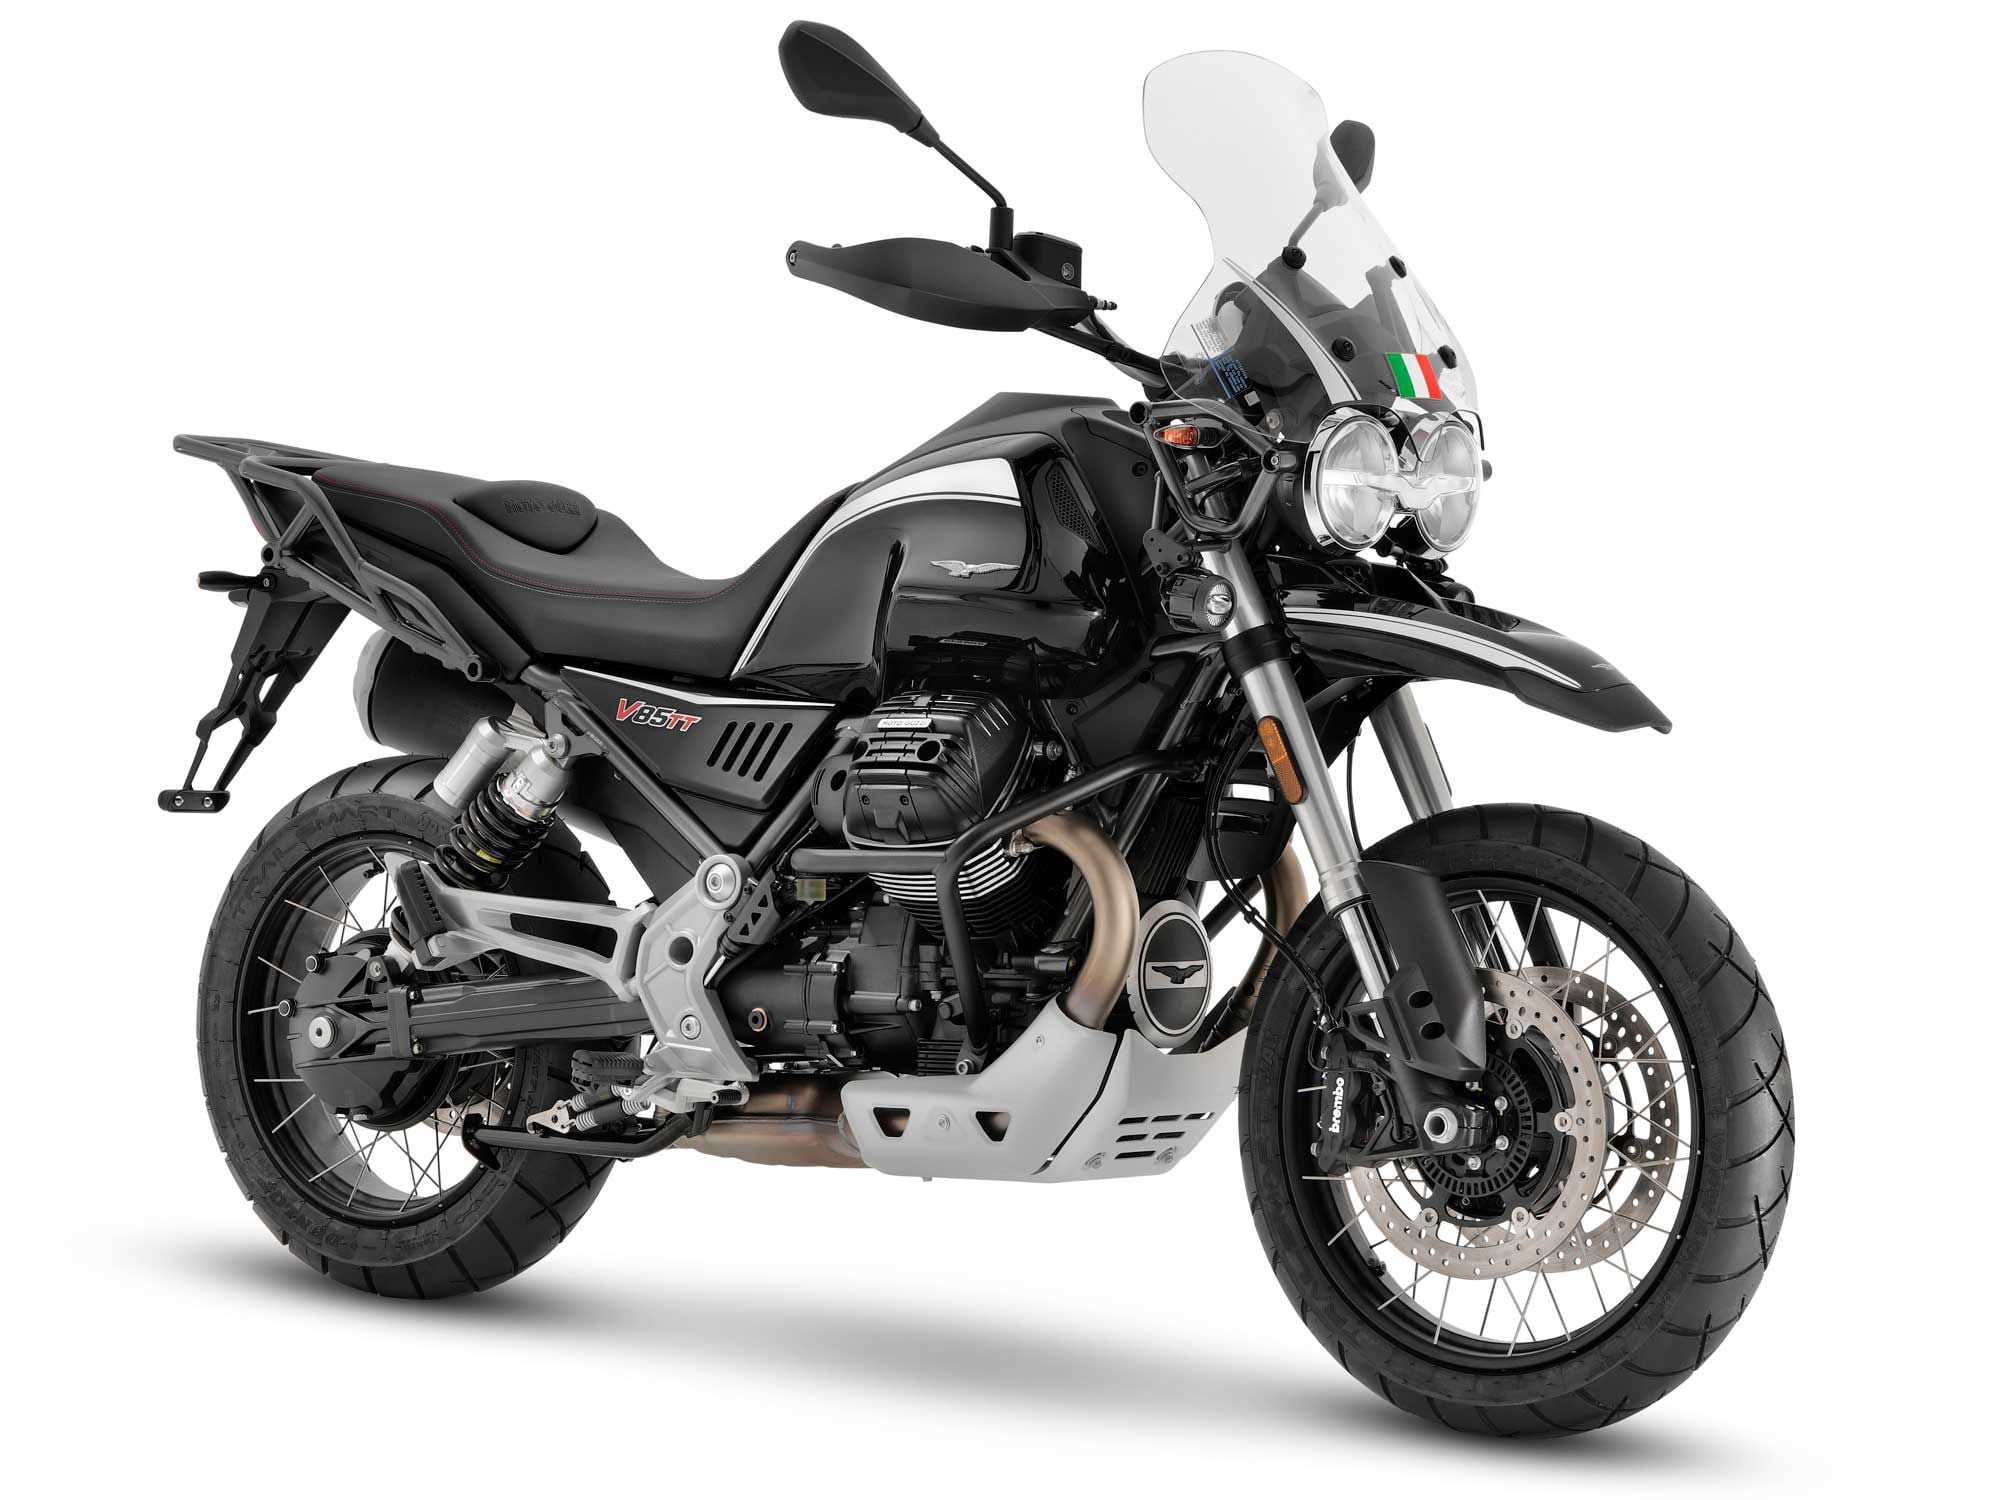 The 2022 V85 TT Guardia D’onore edition will be released in a numbered series of 1,946 models.